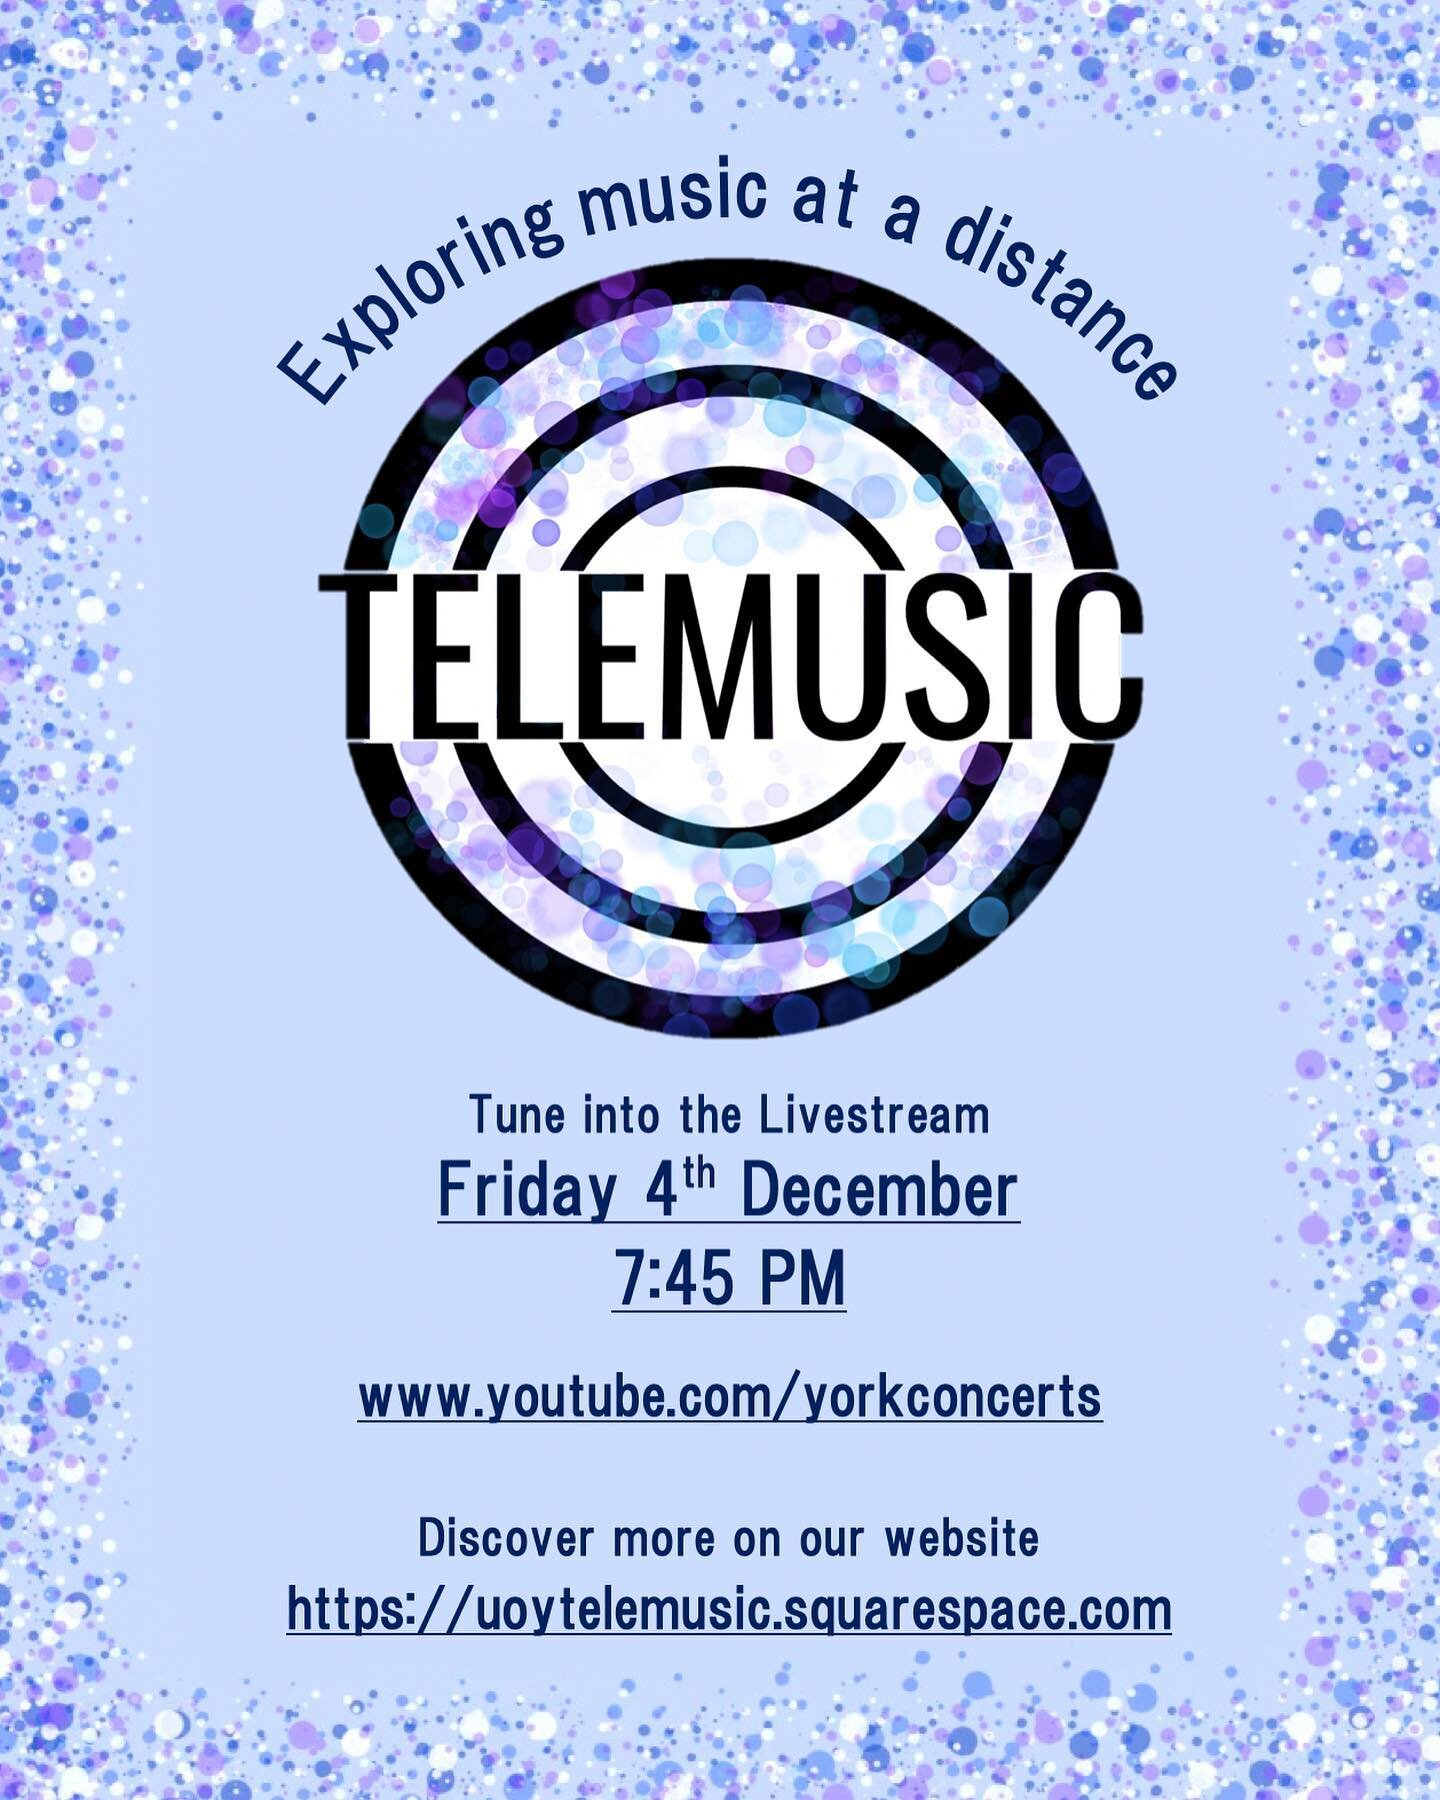 ✨Tune in tomorrow at 7:45 PM at www.youtube.com/yorkconcerts to watch our TELEMUSIC livestream!! You won&rsquo;t want to miss this, a culmination of all the work we have done over this term - it&rsquo;s going to be brilliant!✨